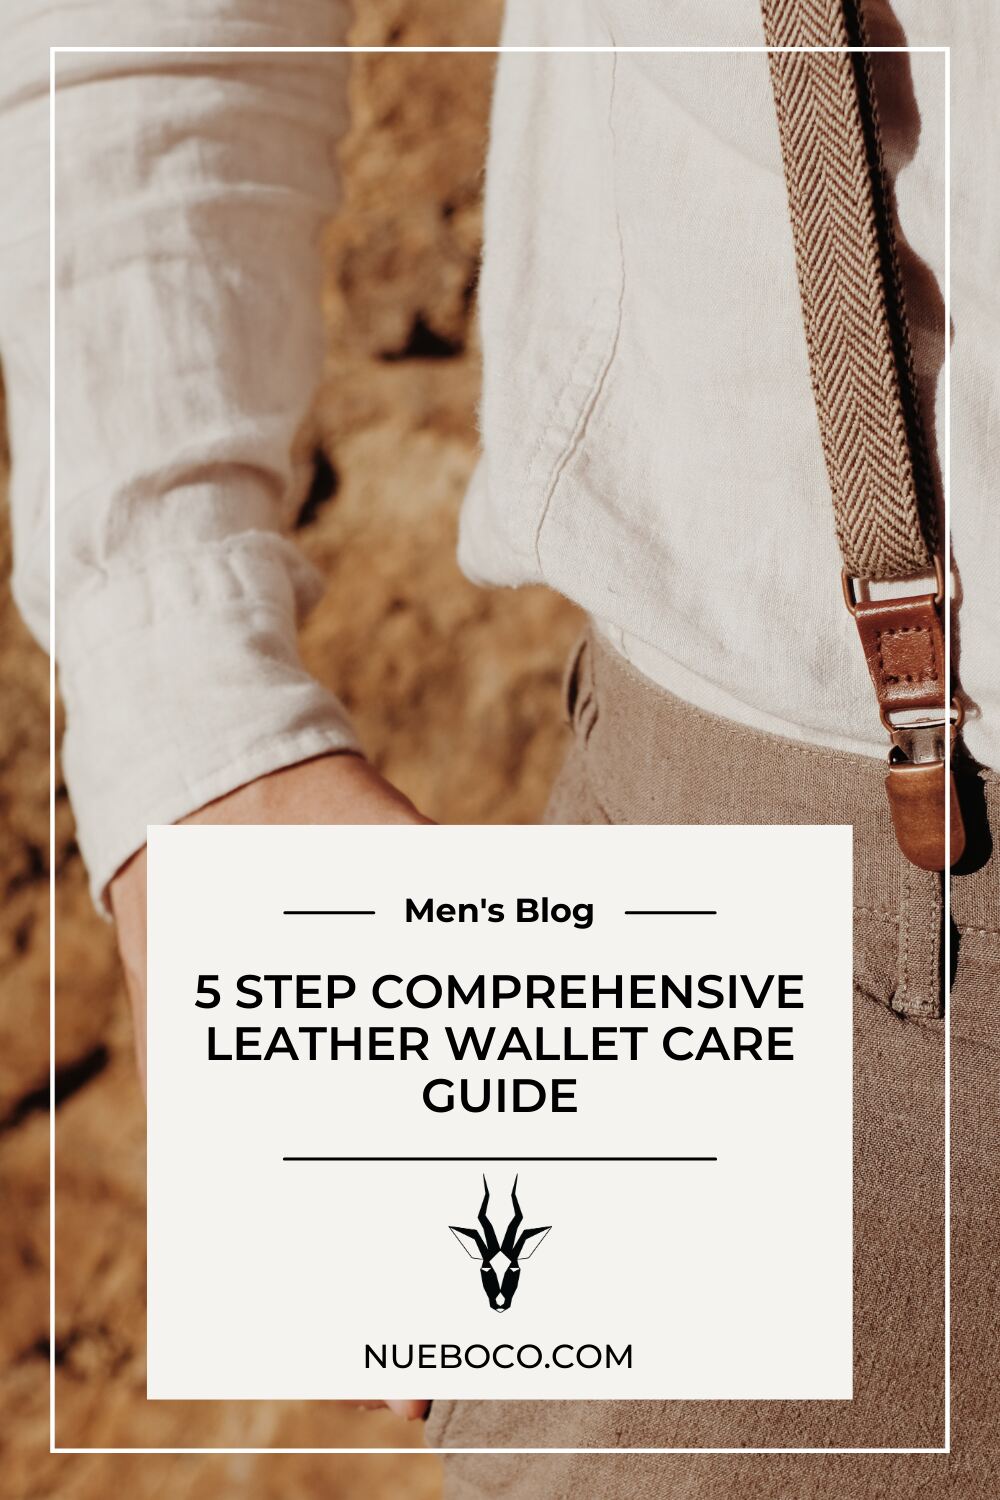 5 Step Comprehensive Leather Wallet Care Guide